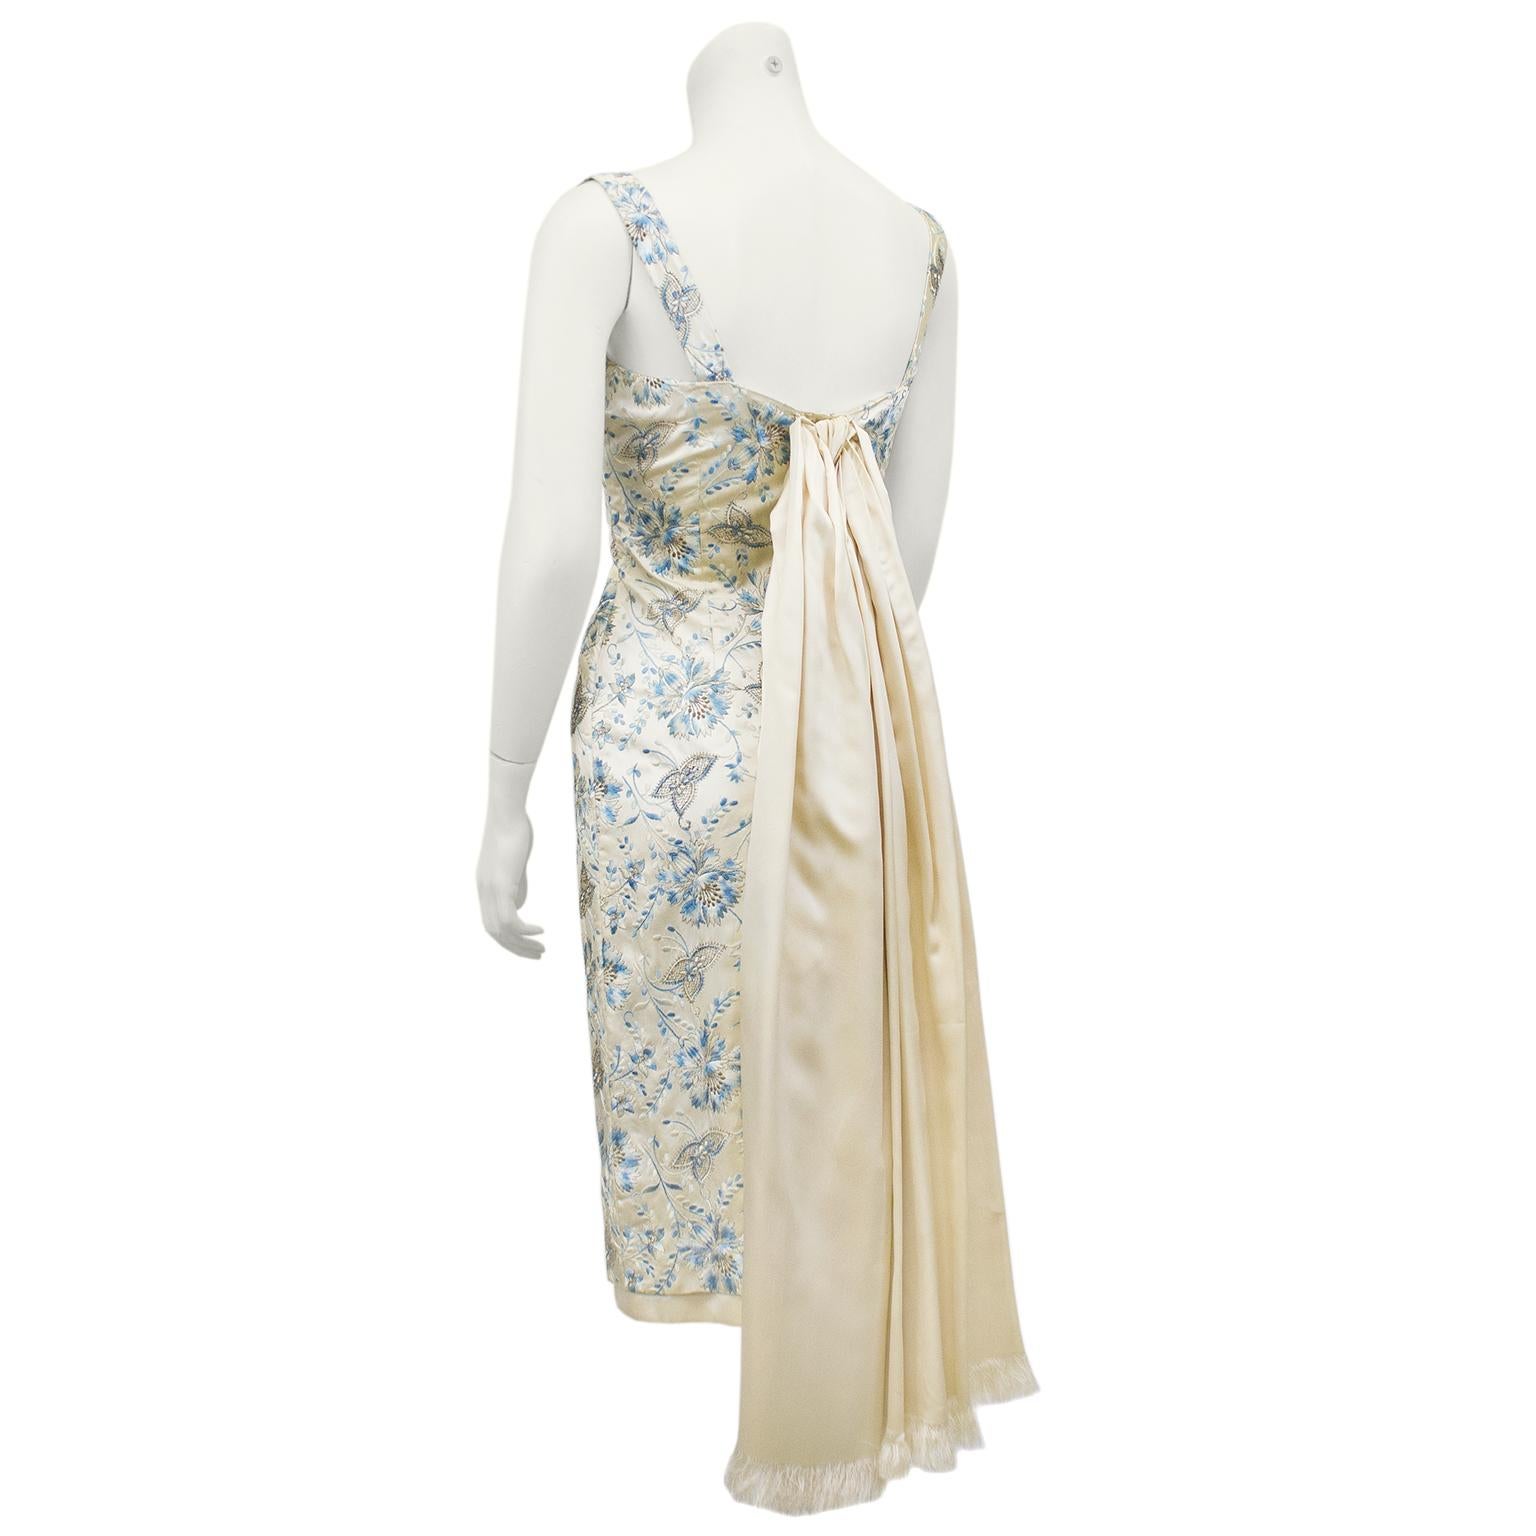 White 1960s Cream and Blue Floral Embroidered Satin Cocktail Dress